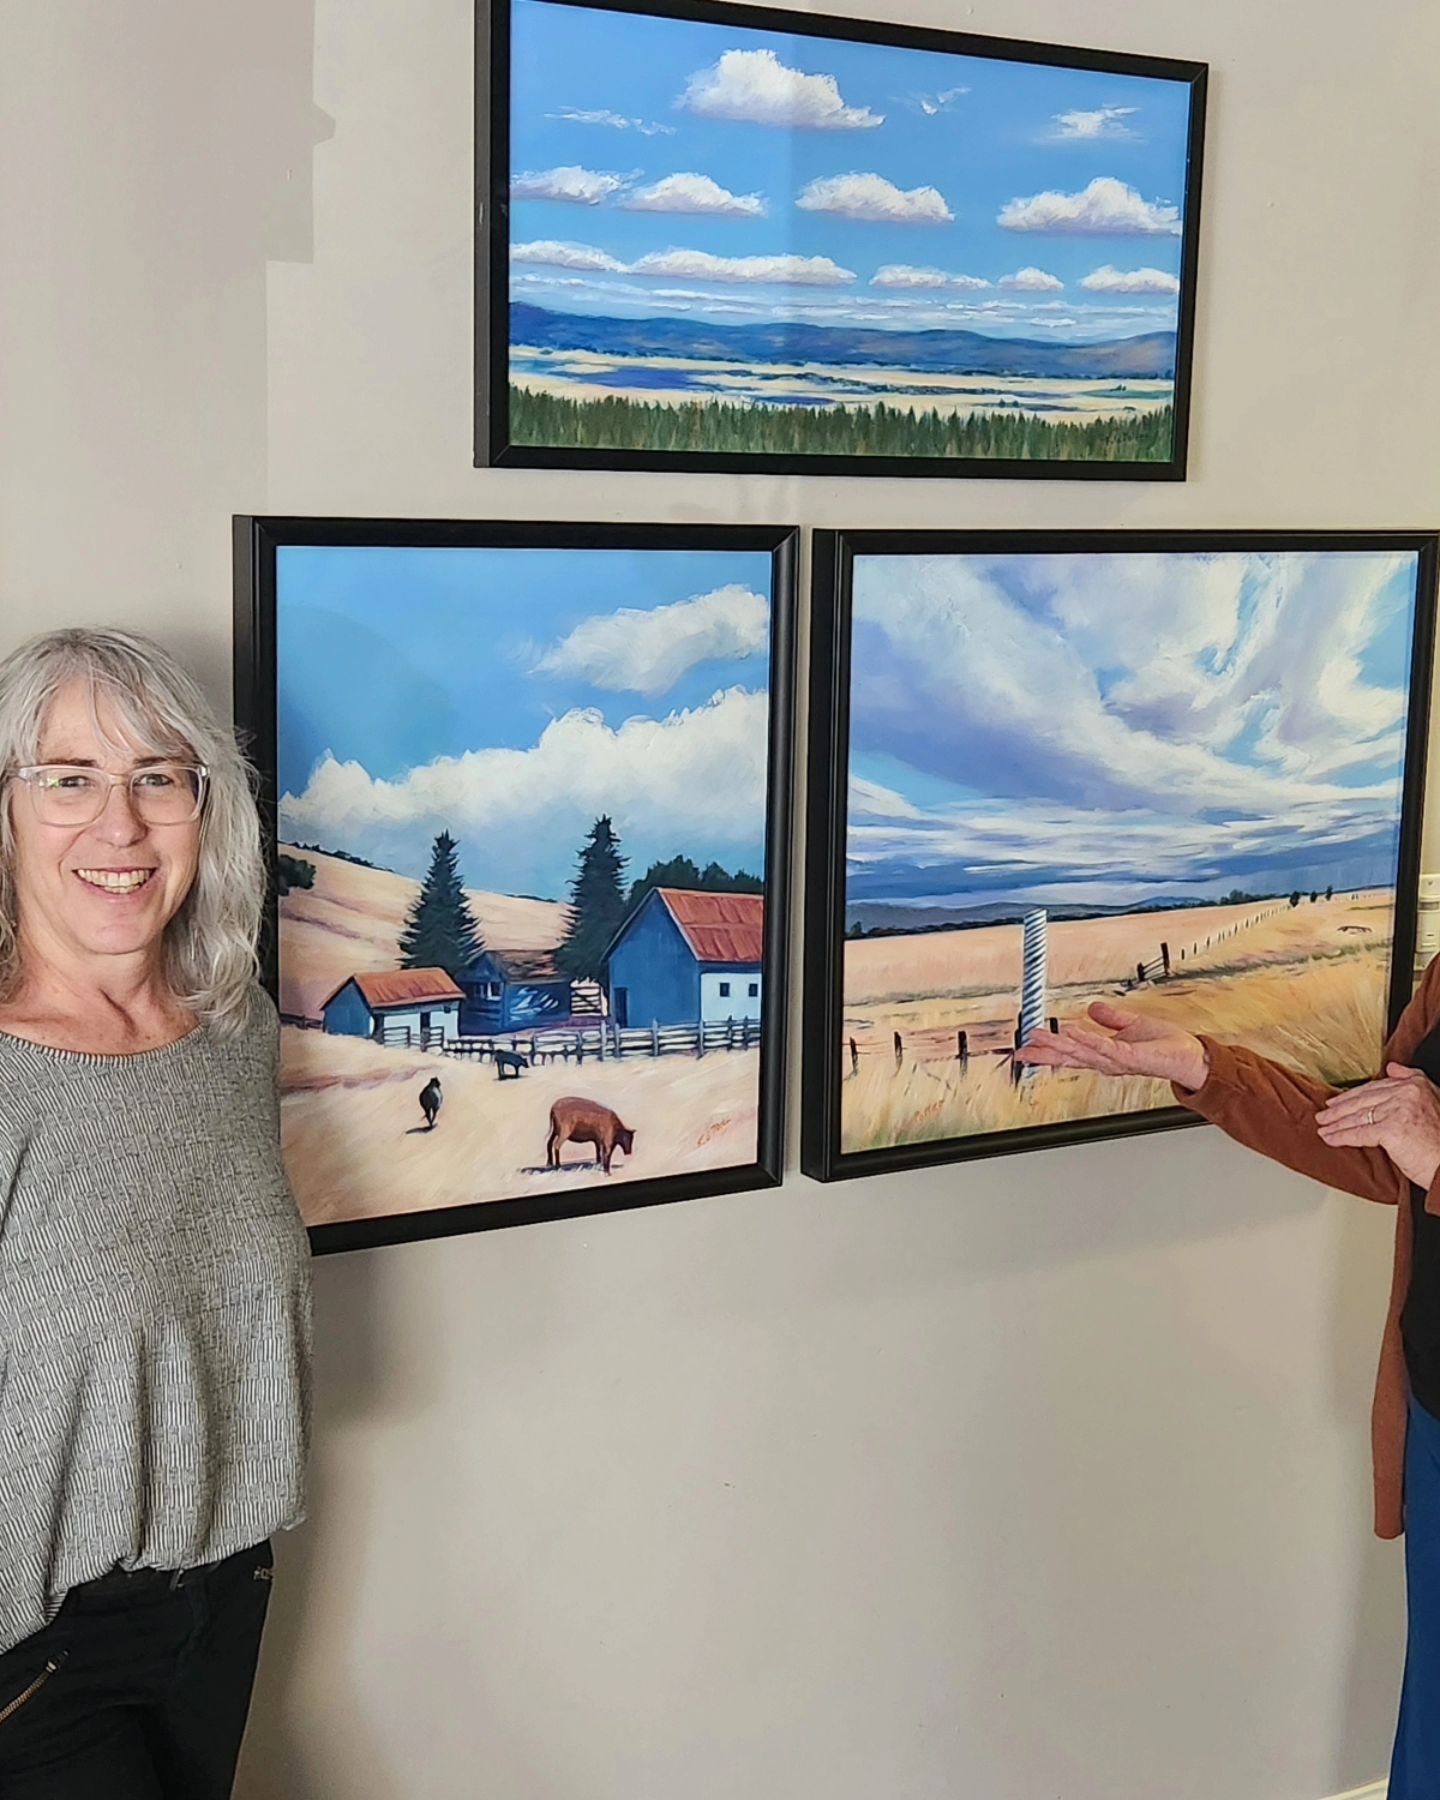 I just wanted to .ake a name correction for the lovely Janet Silvergate @oswaldrestaurant where my show is hanging.  I was so impressed at how quickly she got my show up! It was a delight to work with her yesterday!
She is also an artist and is parti